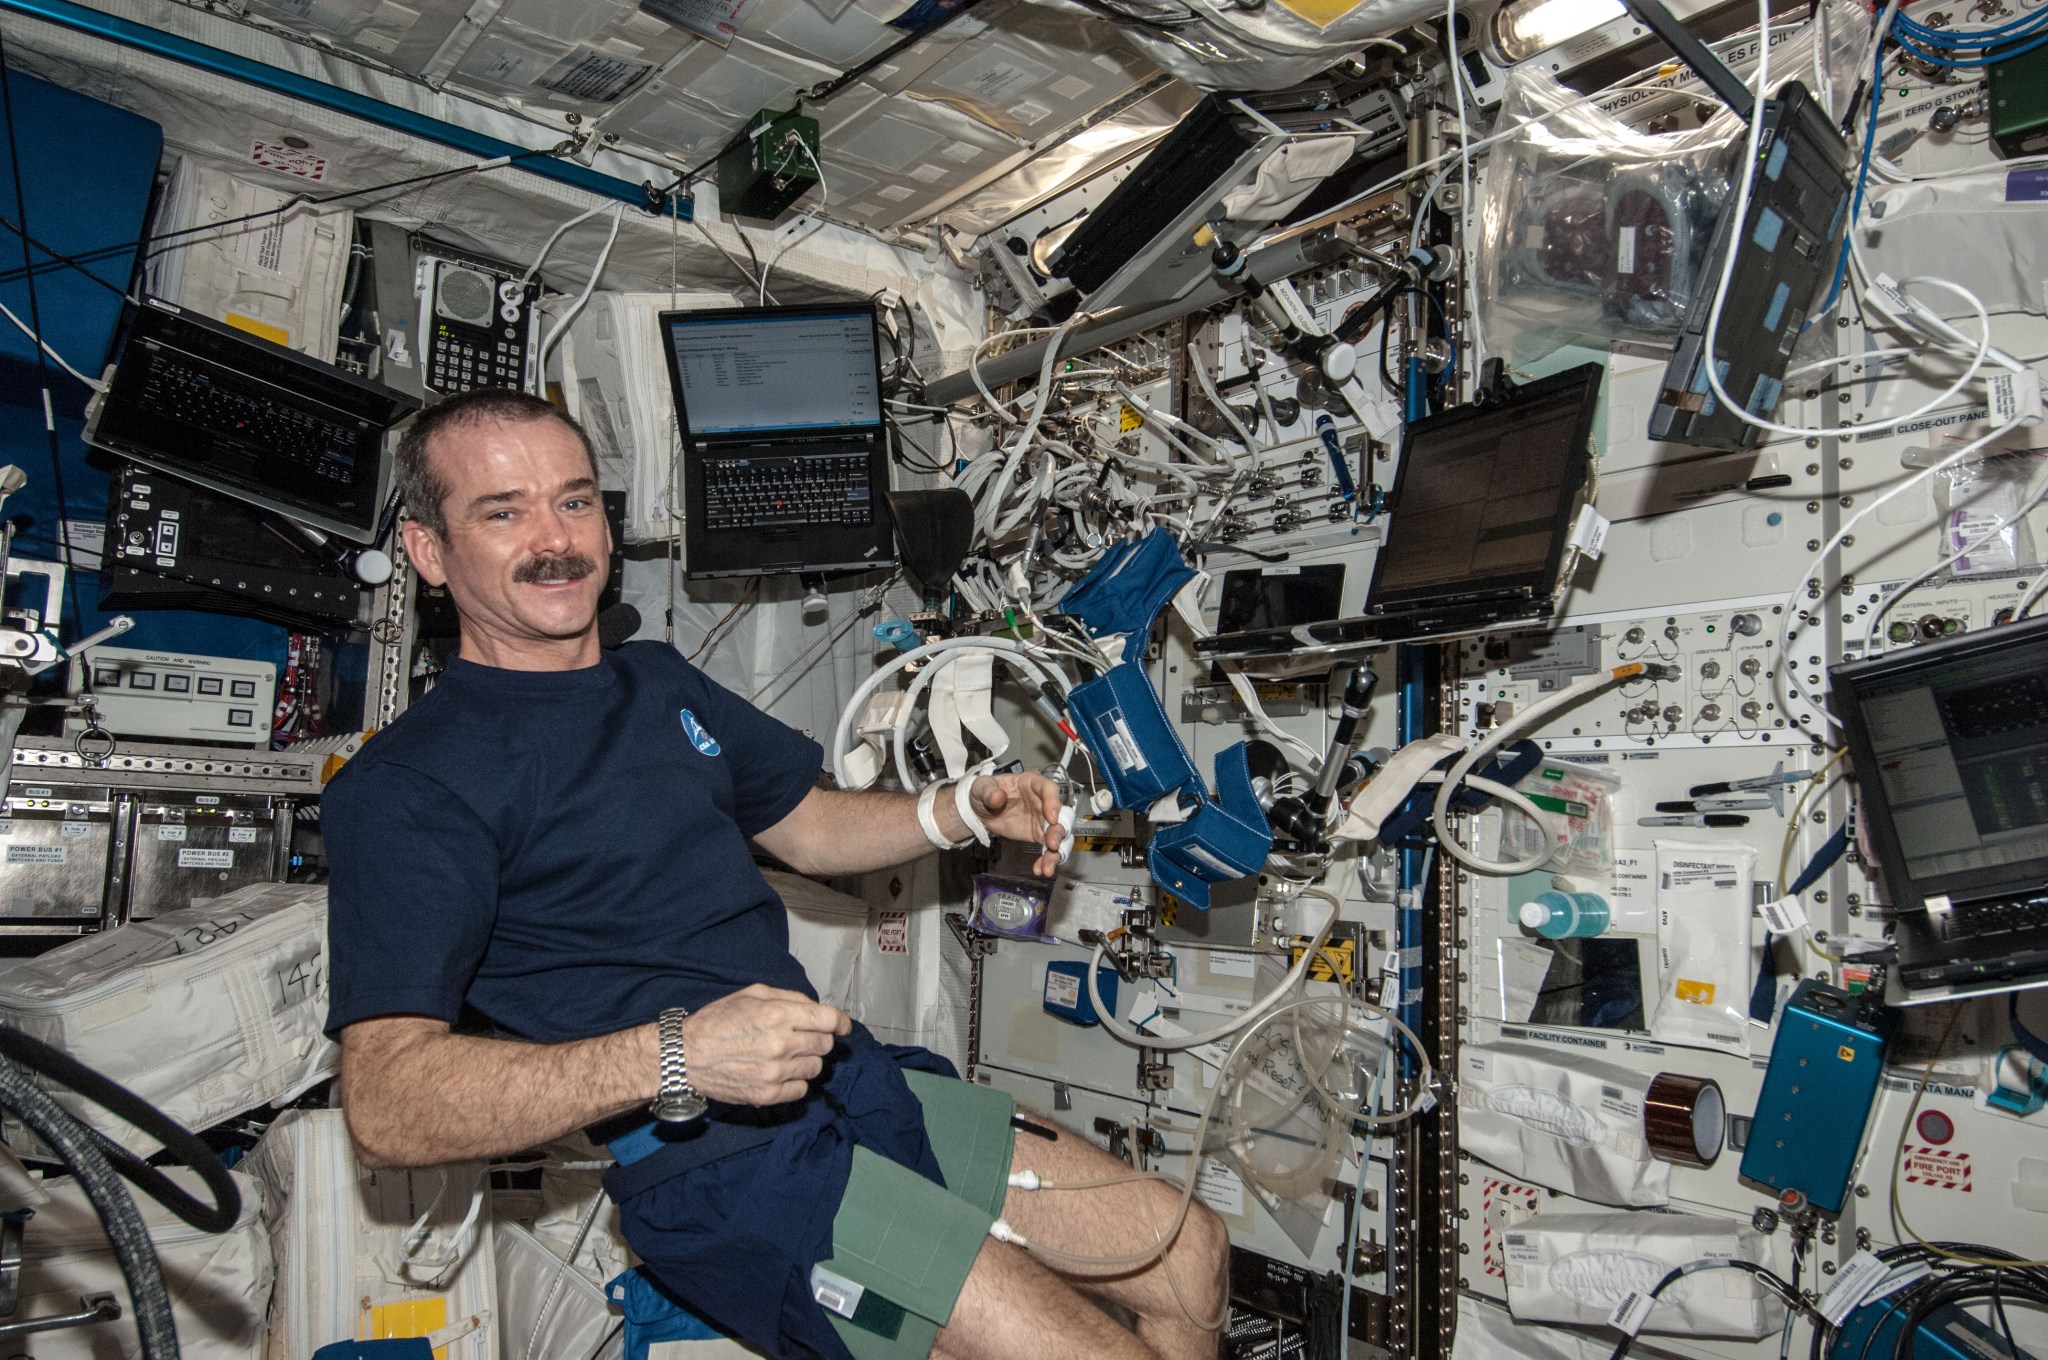 astronaut Chris Hadfield setting up the HRF inside the space station